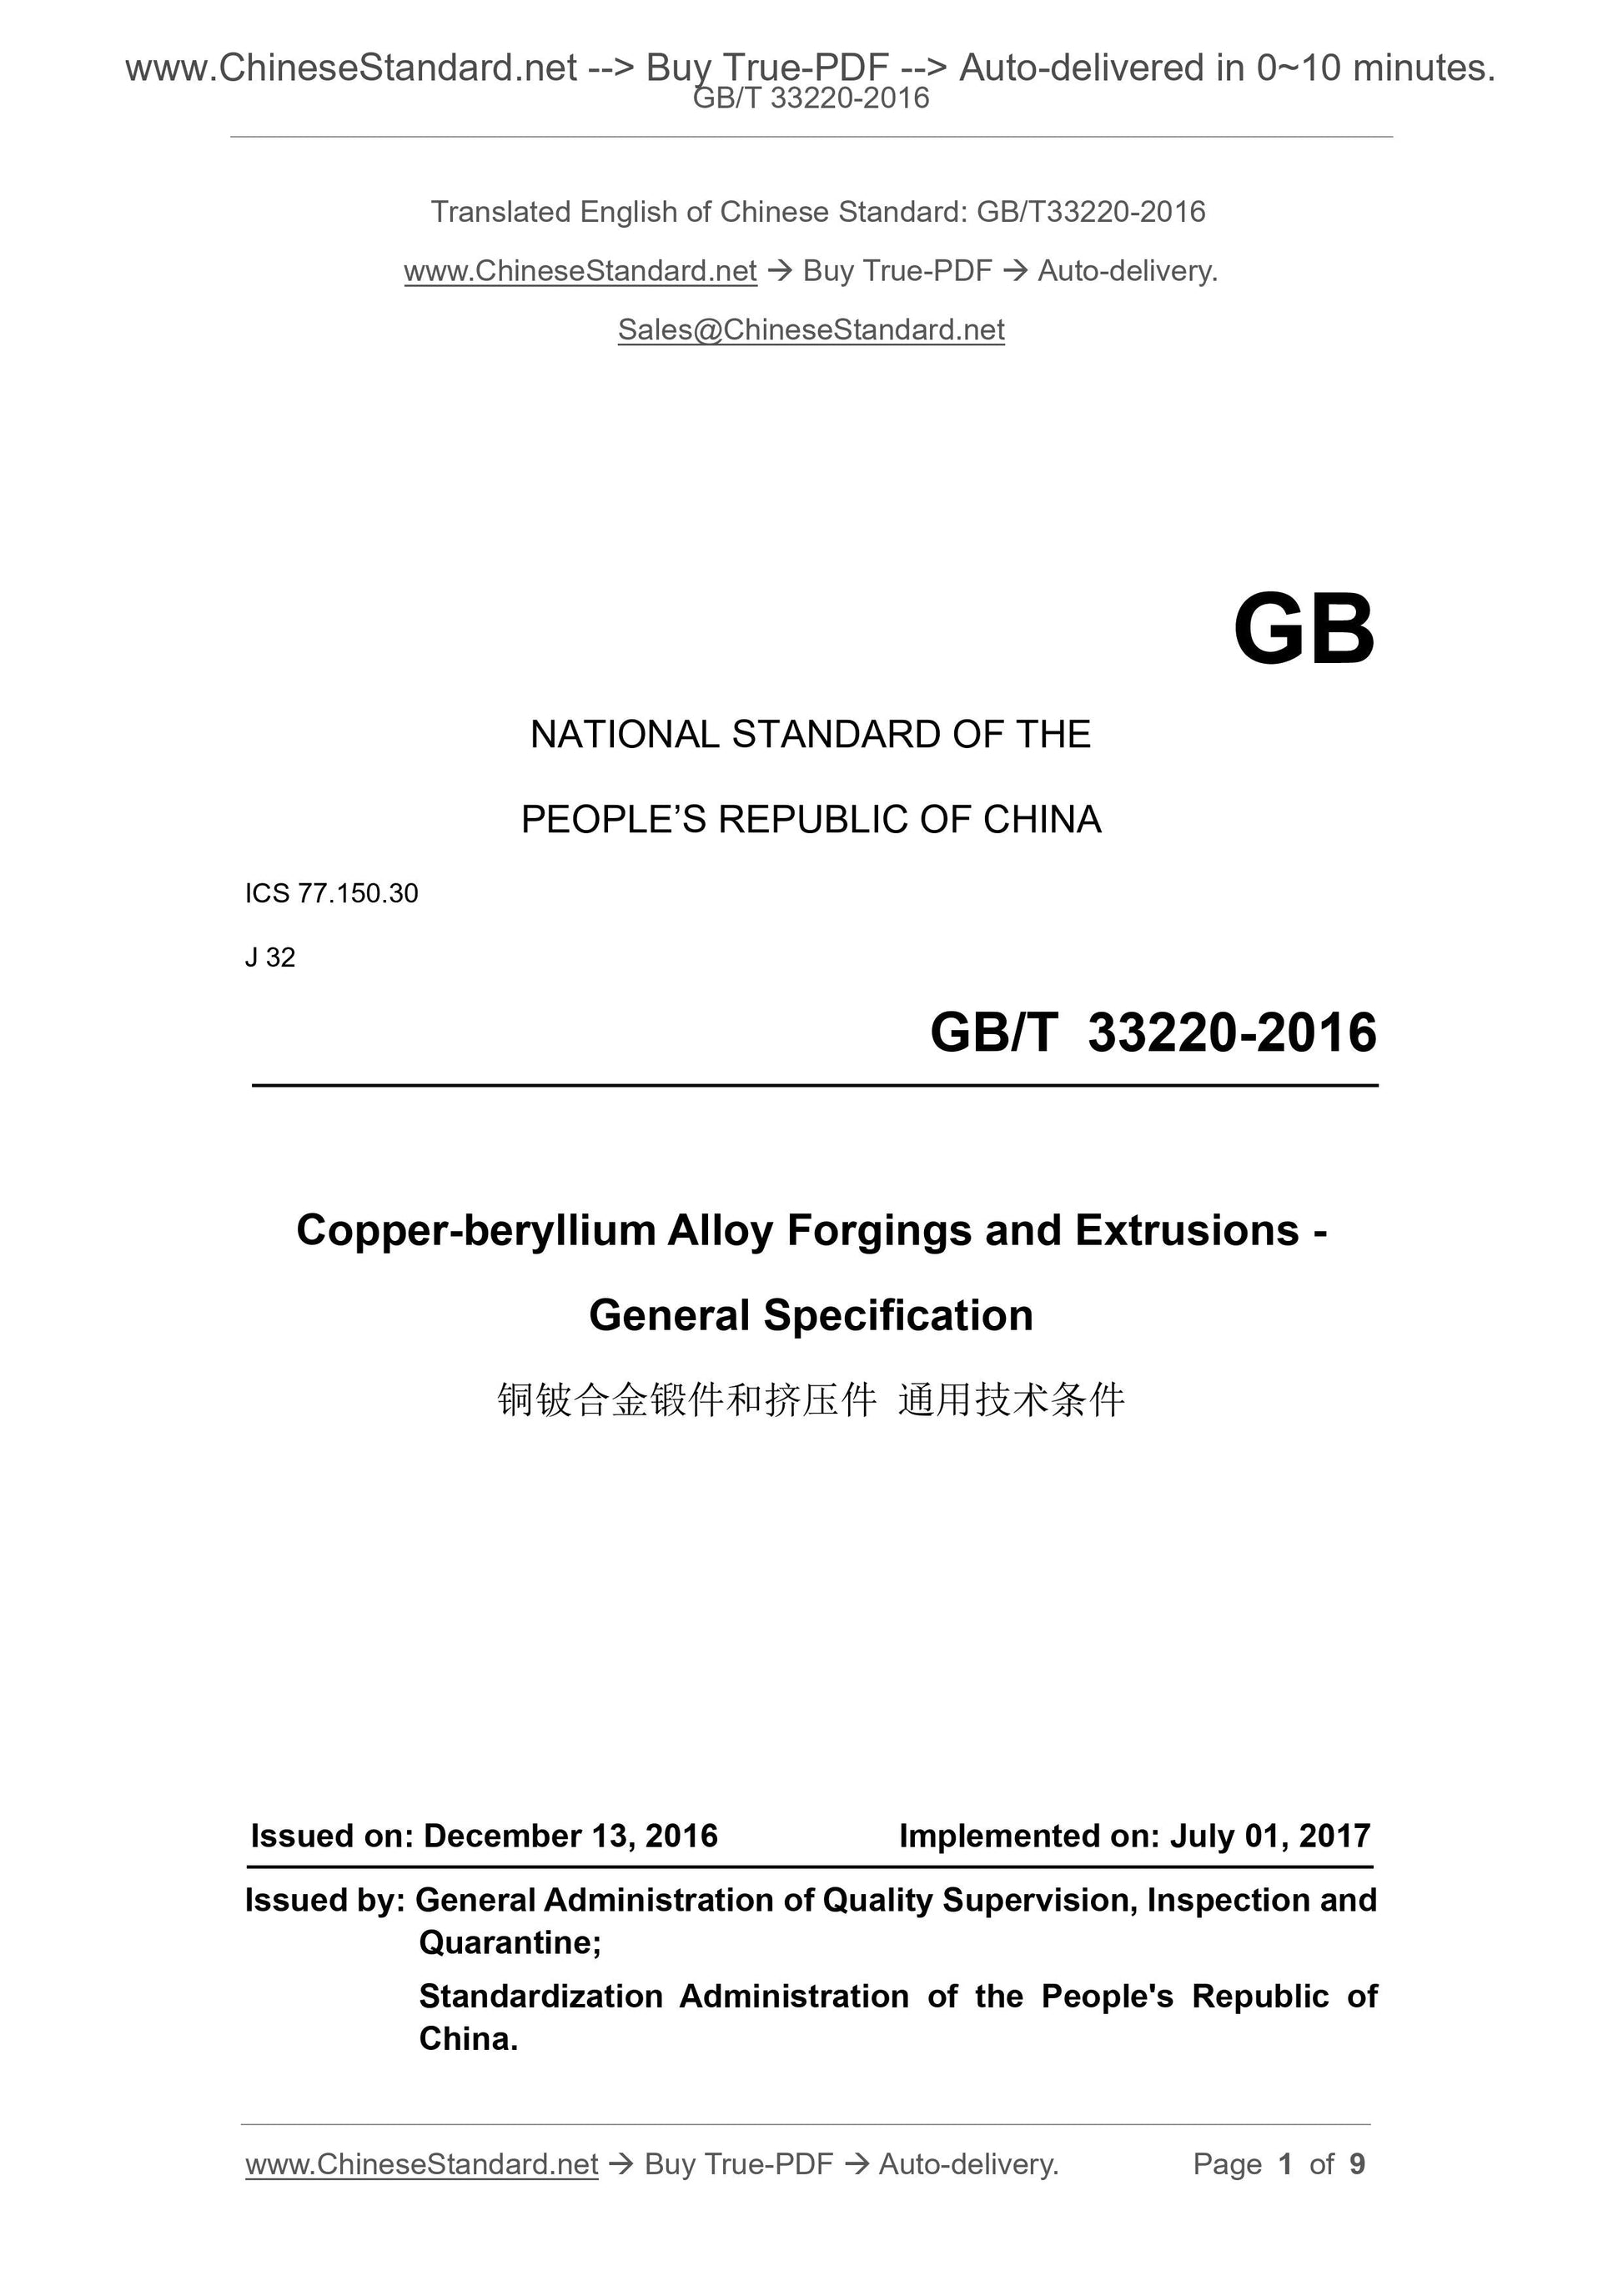 GB/T 33220-2016 Page 1